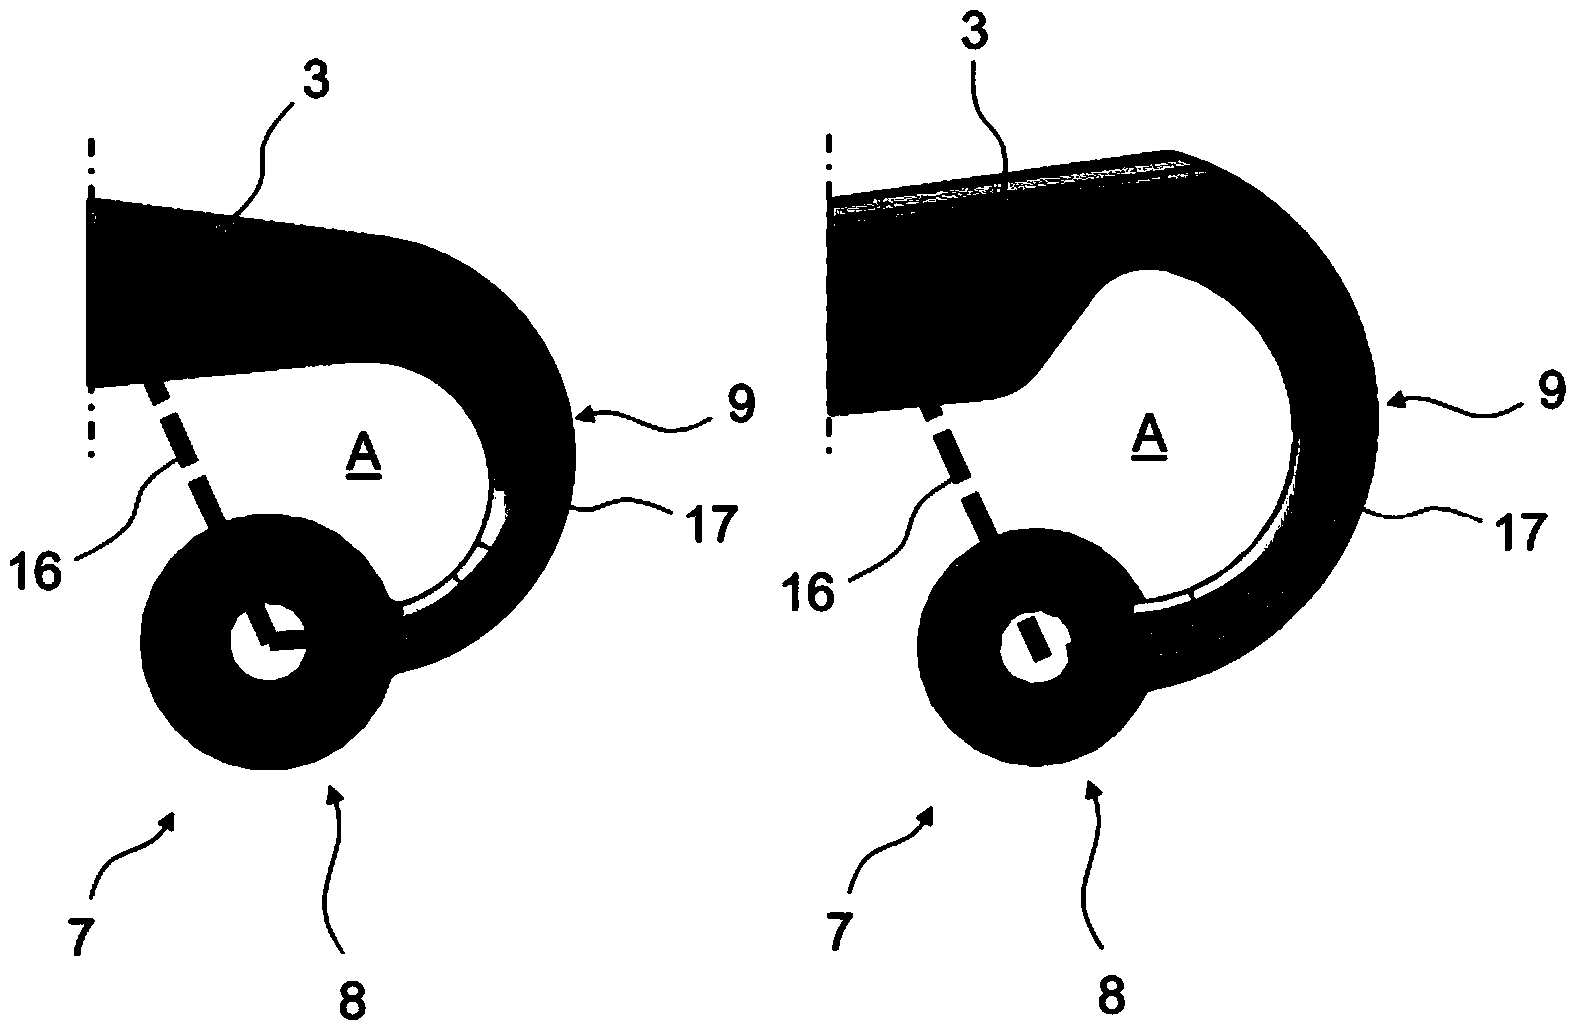 Articulated connection for transferring a steering movement onto a vehicle wheel